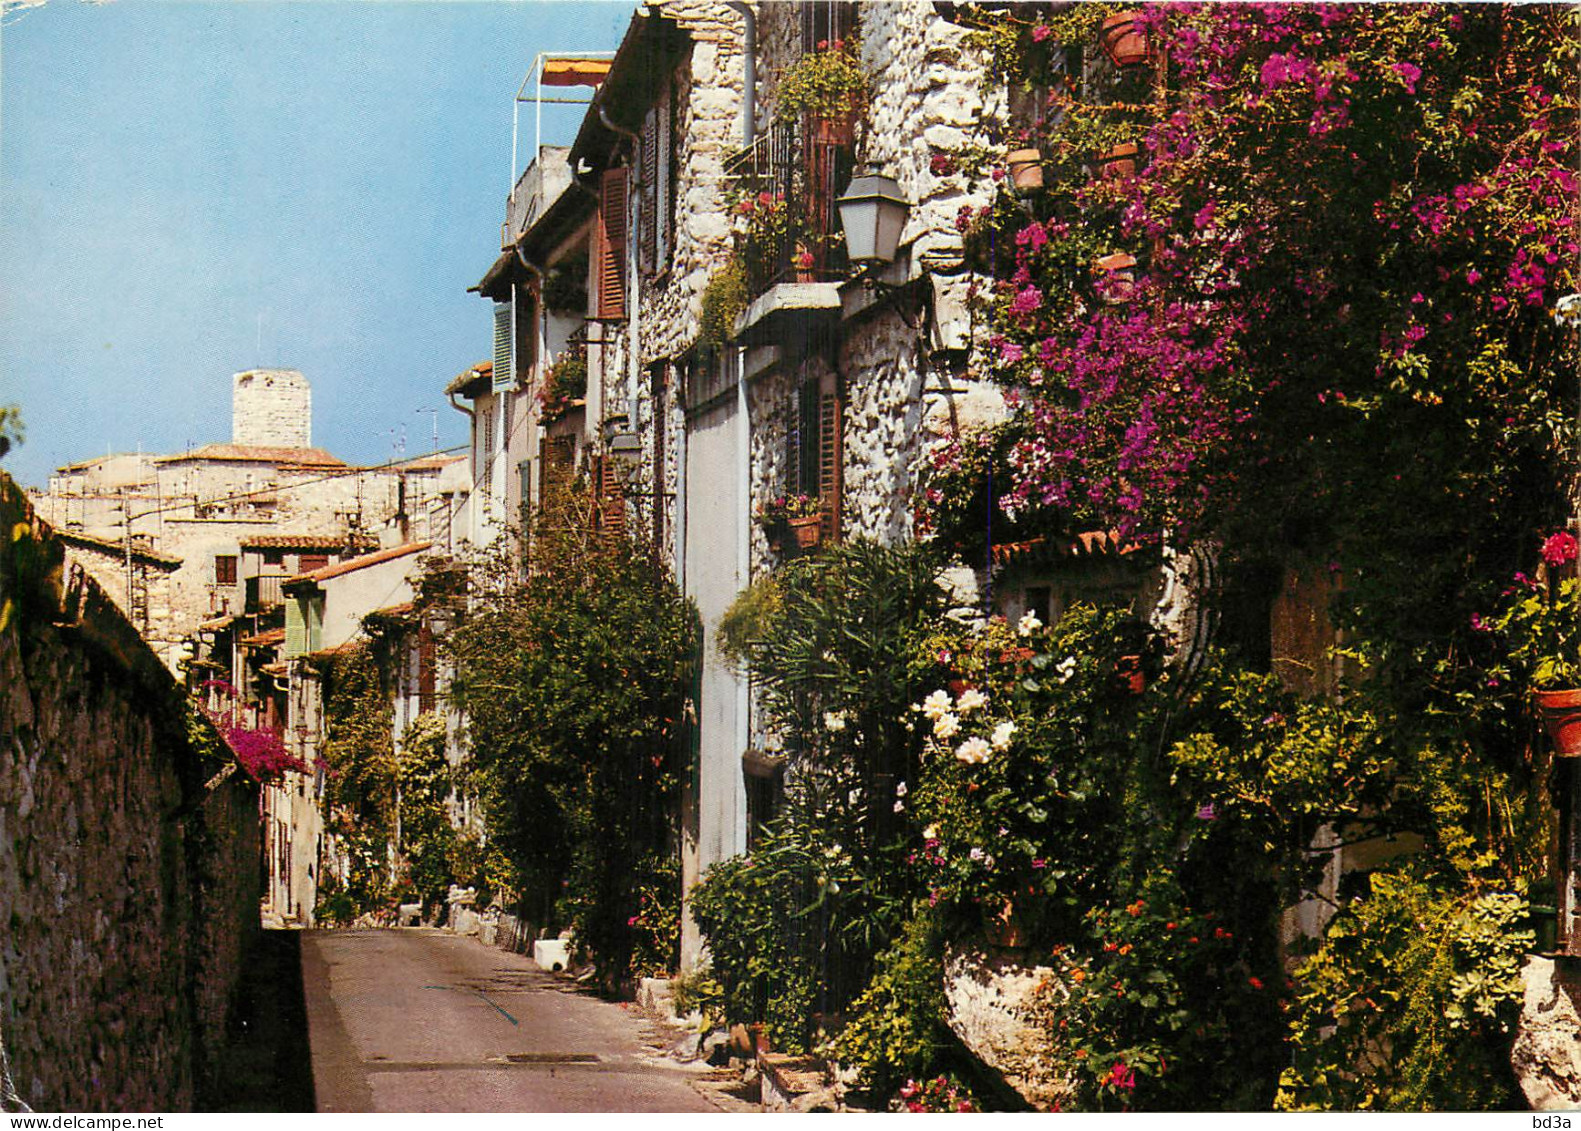 06 - ANTIBES - Antibes - Oude Stad